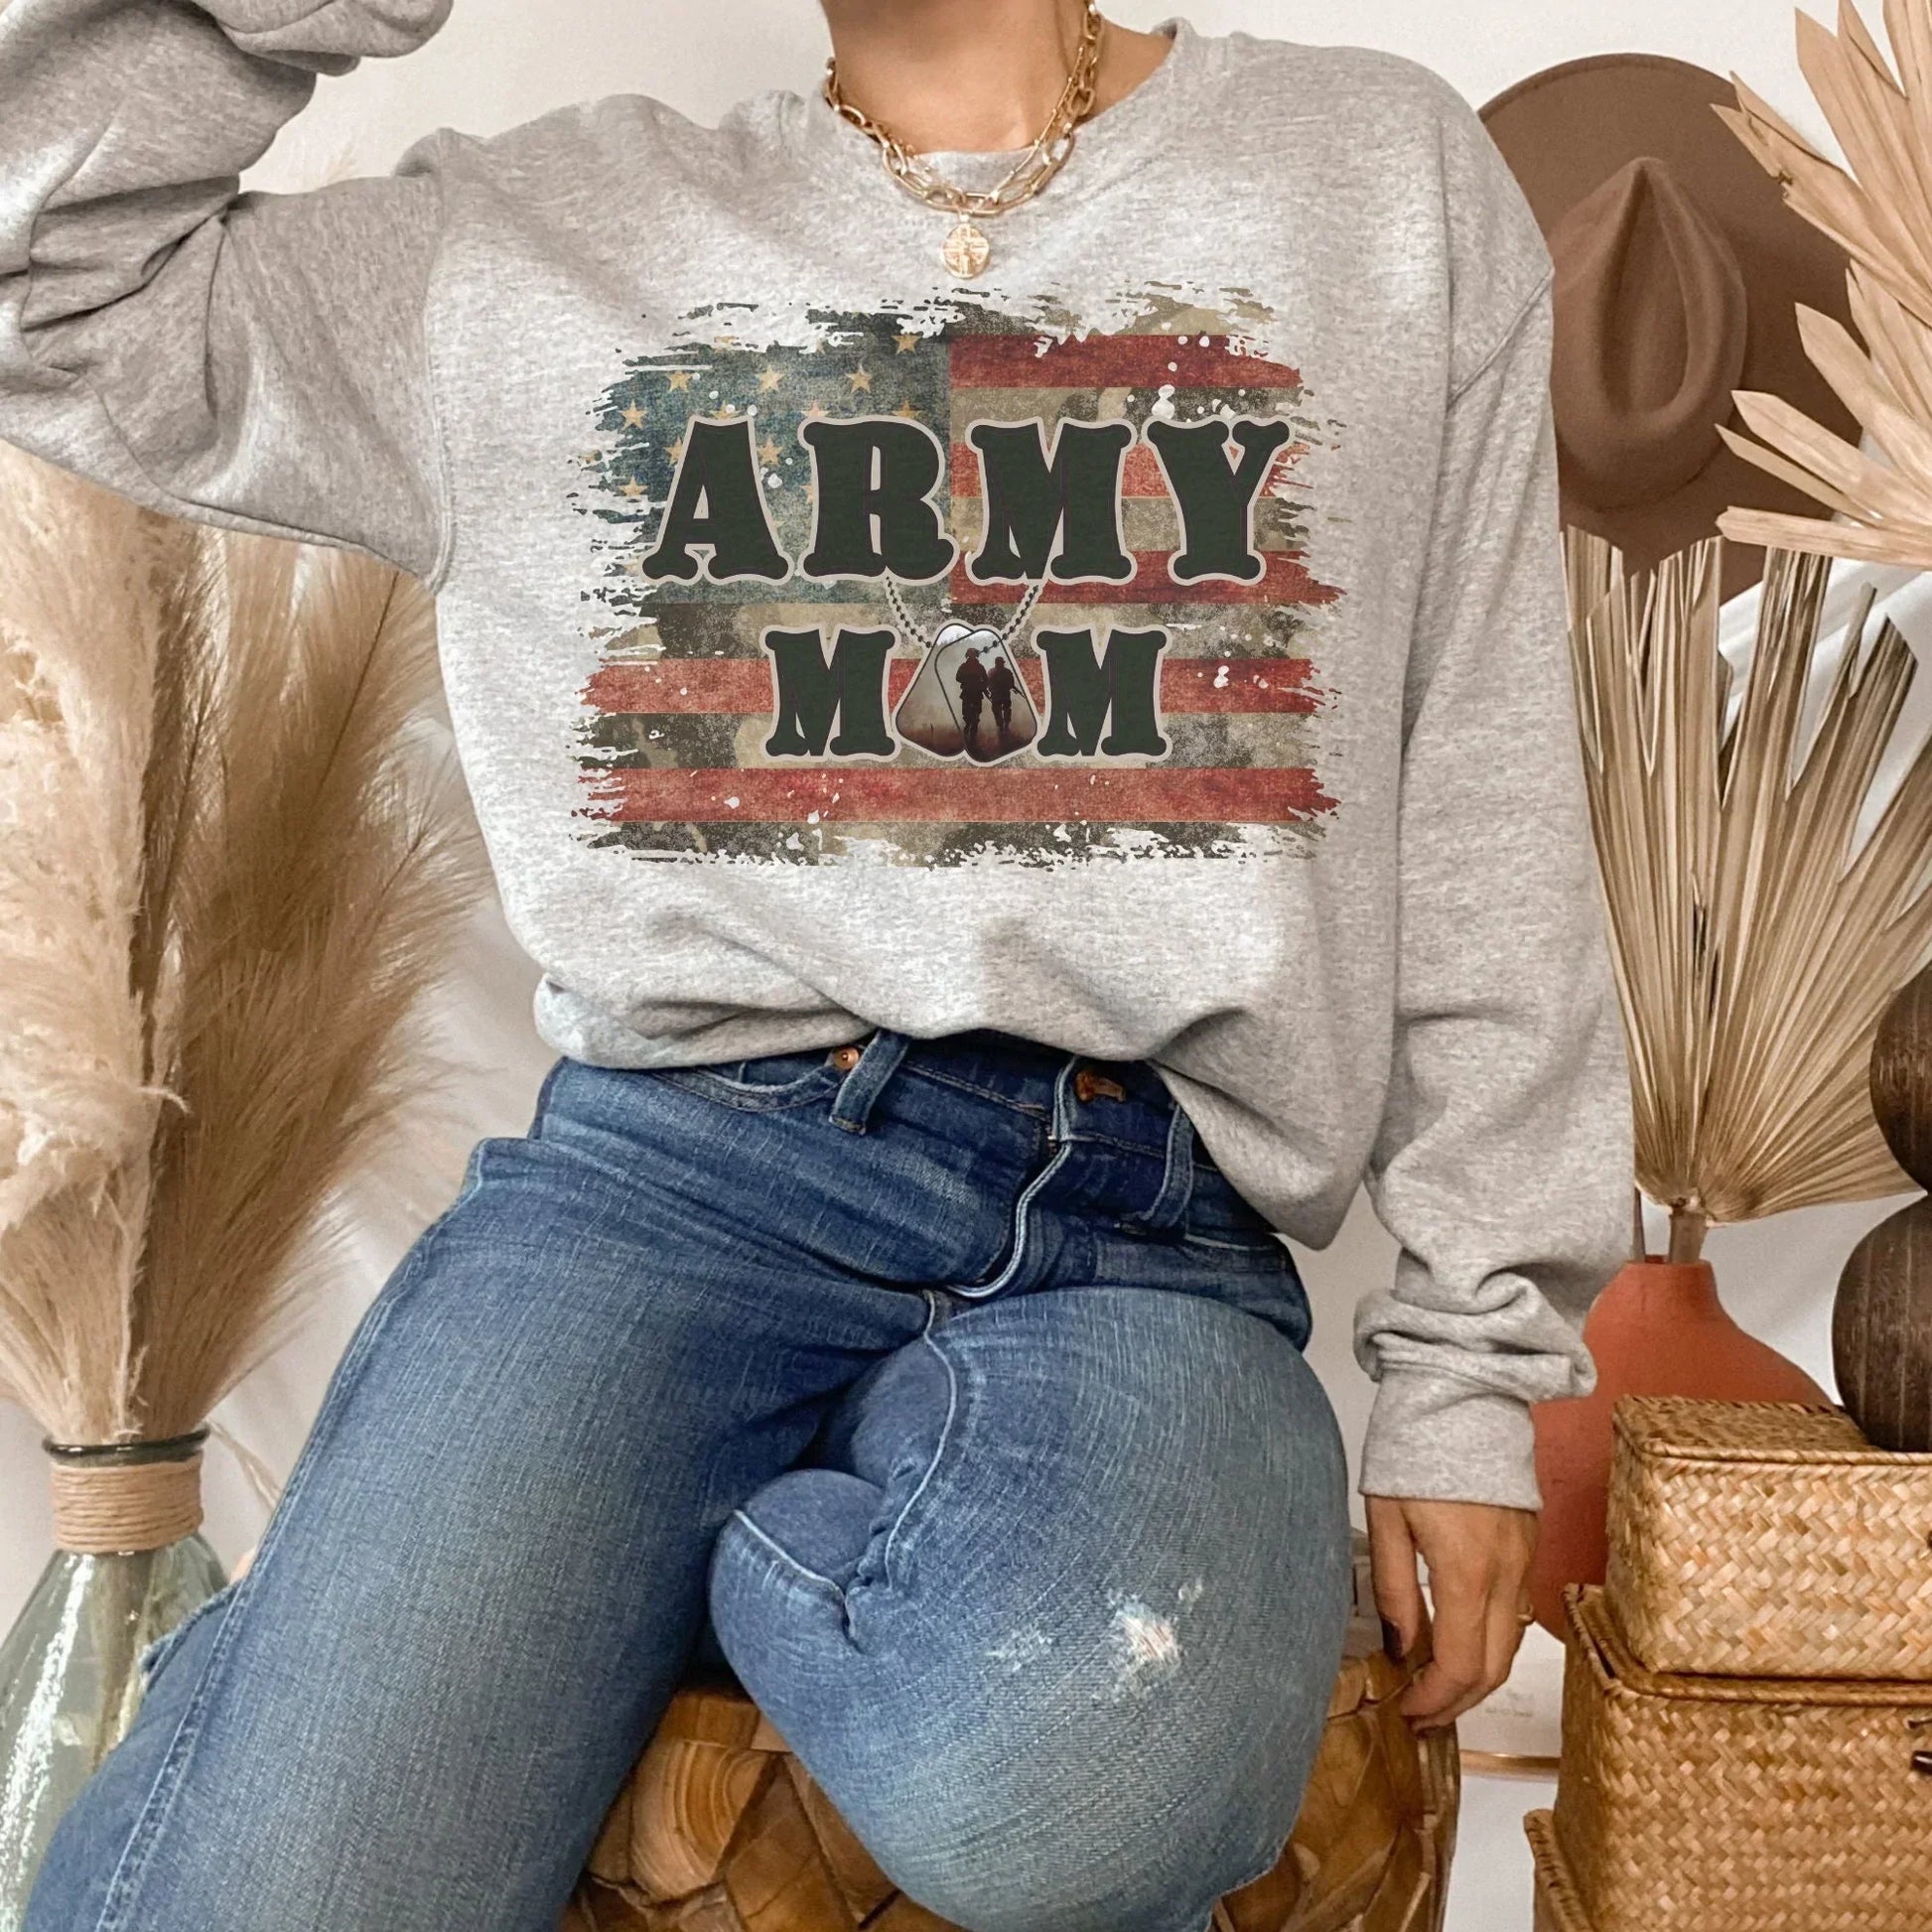 Army Mom Shirt, Military Mom Shirt, Military Wife Sweatshirt, Army Mom Gift, Air Force Mom, Support our troops, Marine Coast guard, Navy Mom HMDesignStudioUS